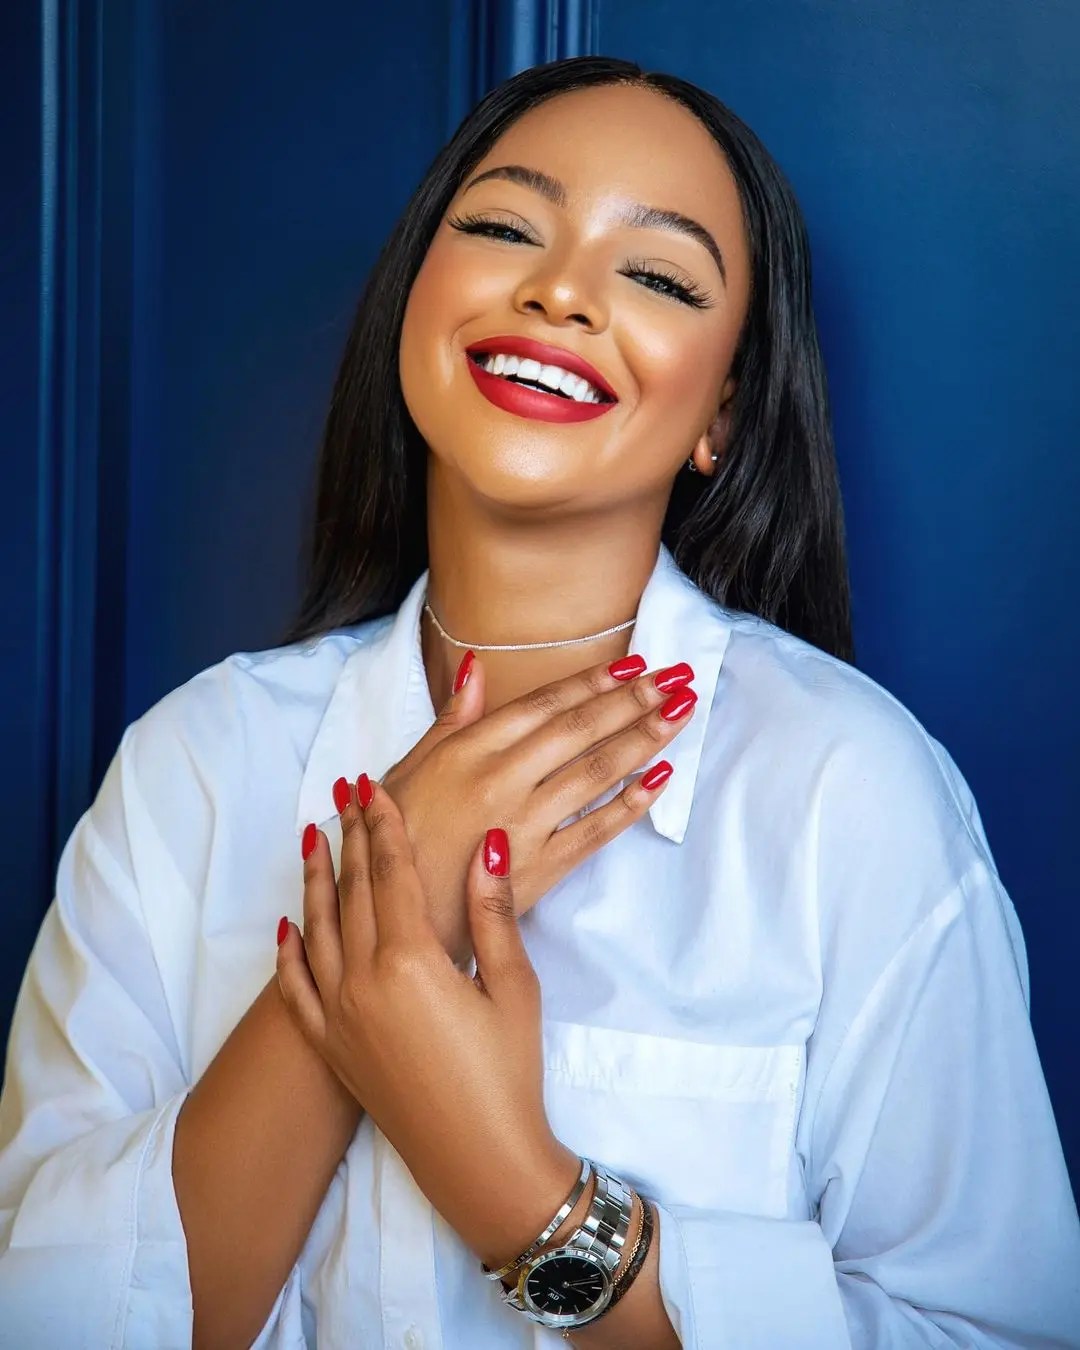 Influencer Mihlali Ndamase shares requirements her future spouse should meet